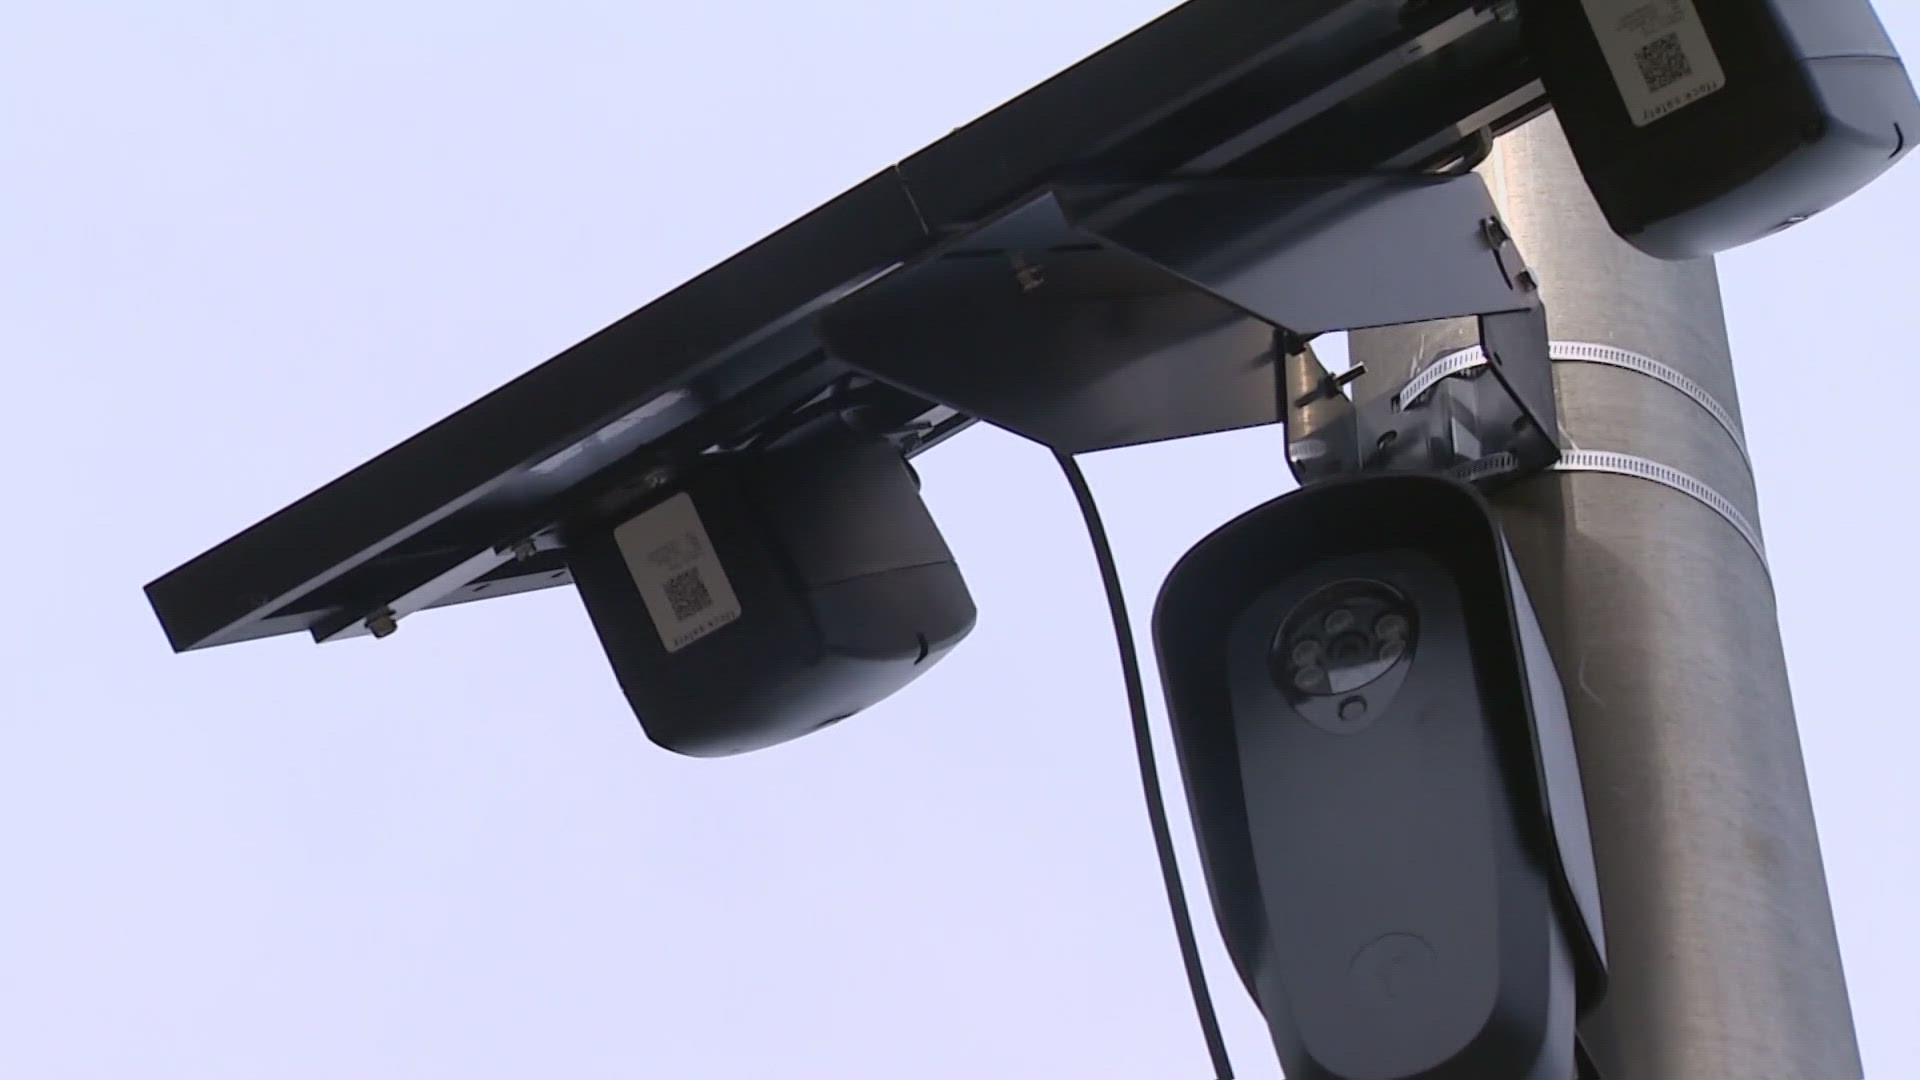 Cities across Washington are turning to technology and using Automated License Plate Reader cameras to combat crime. Critics say the cameras go too far.